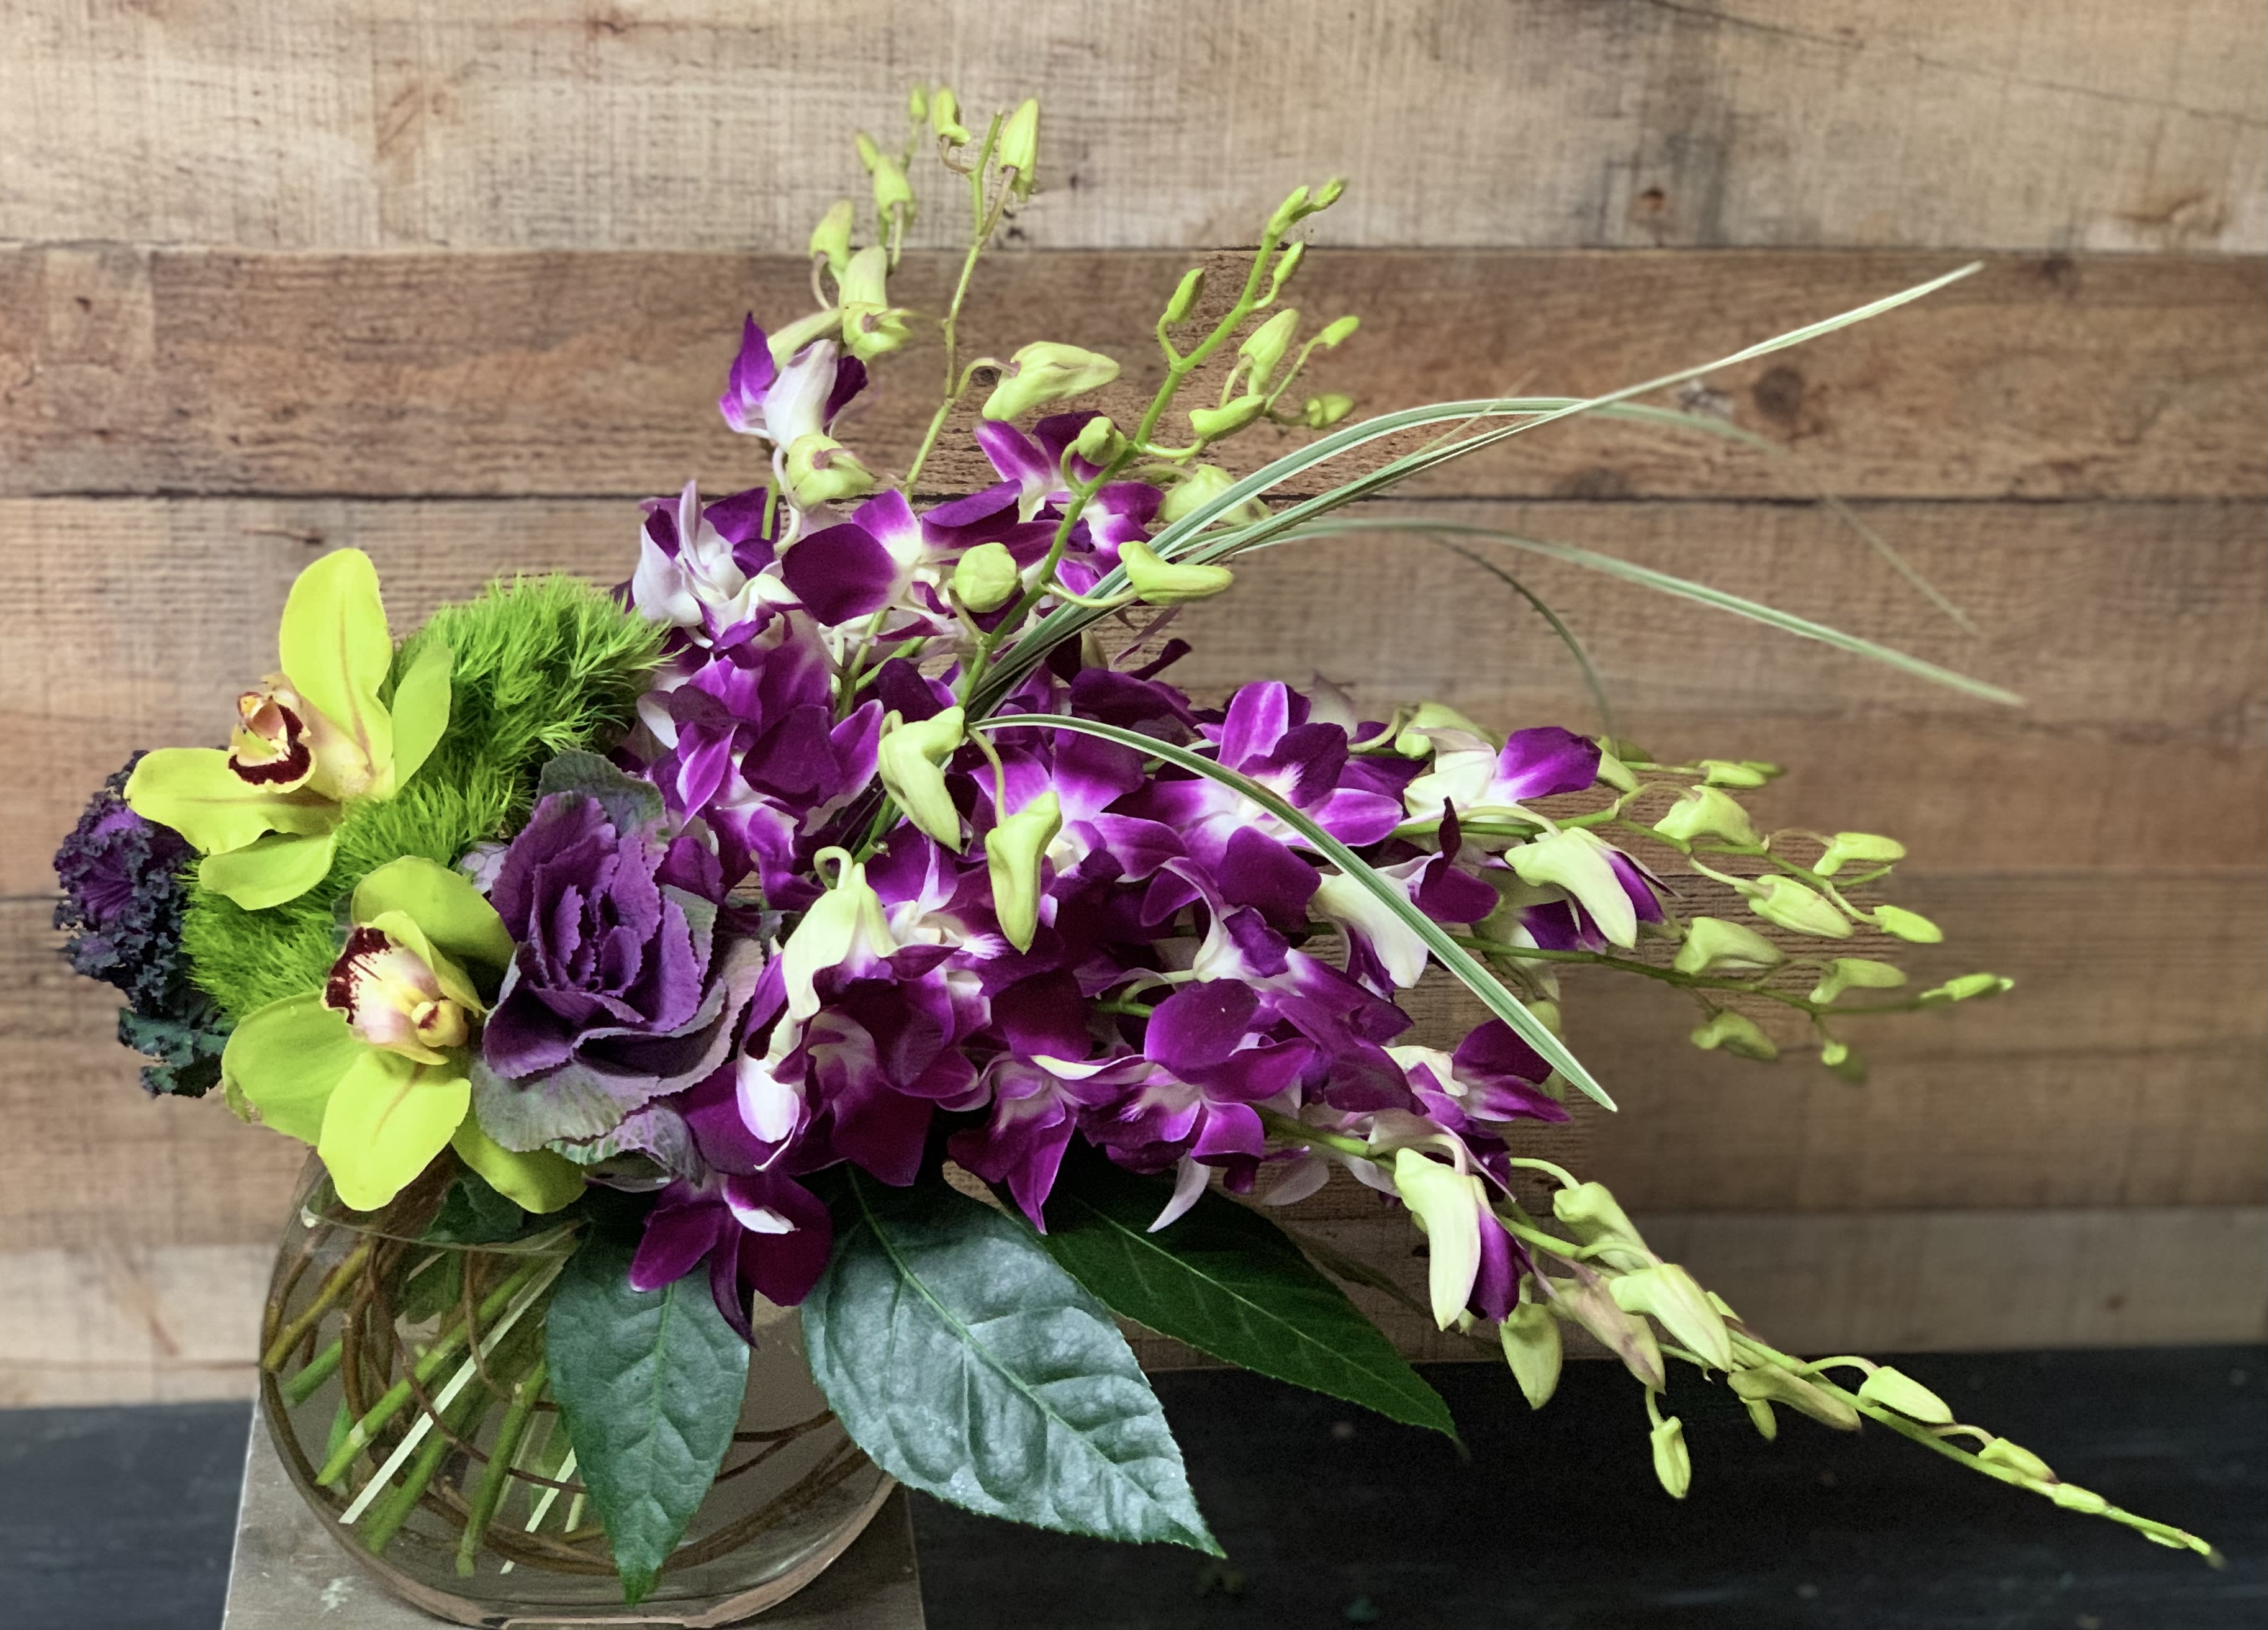 Lovely Orchids - Dendrobium and cymbidium orchids along with kale artistically designed in a clear glass vase